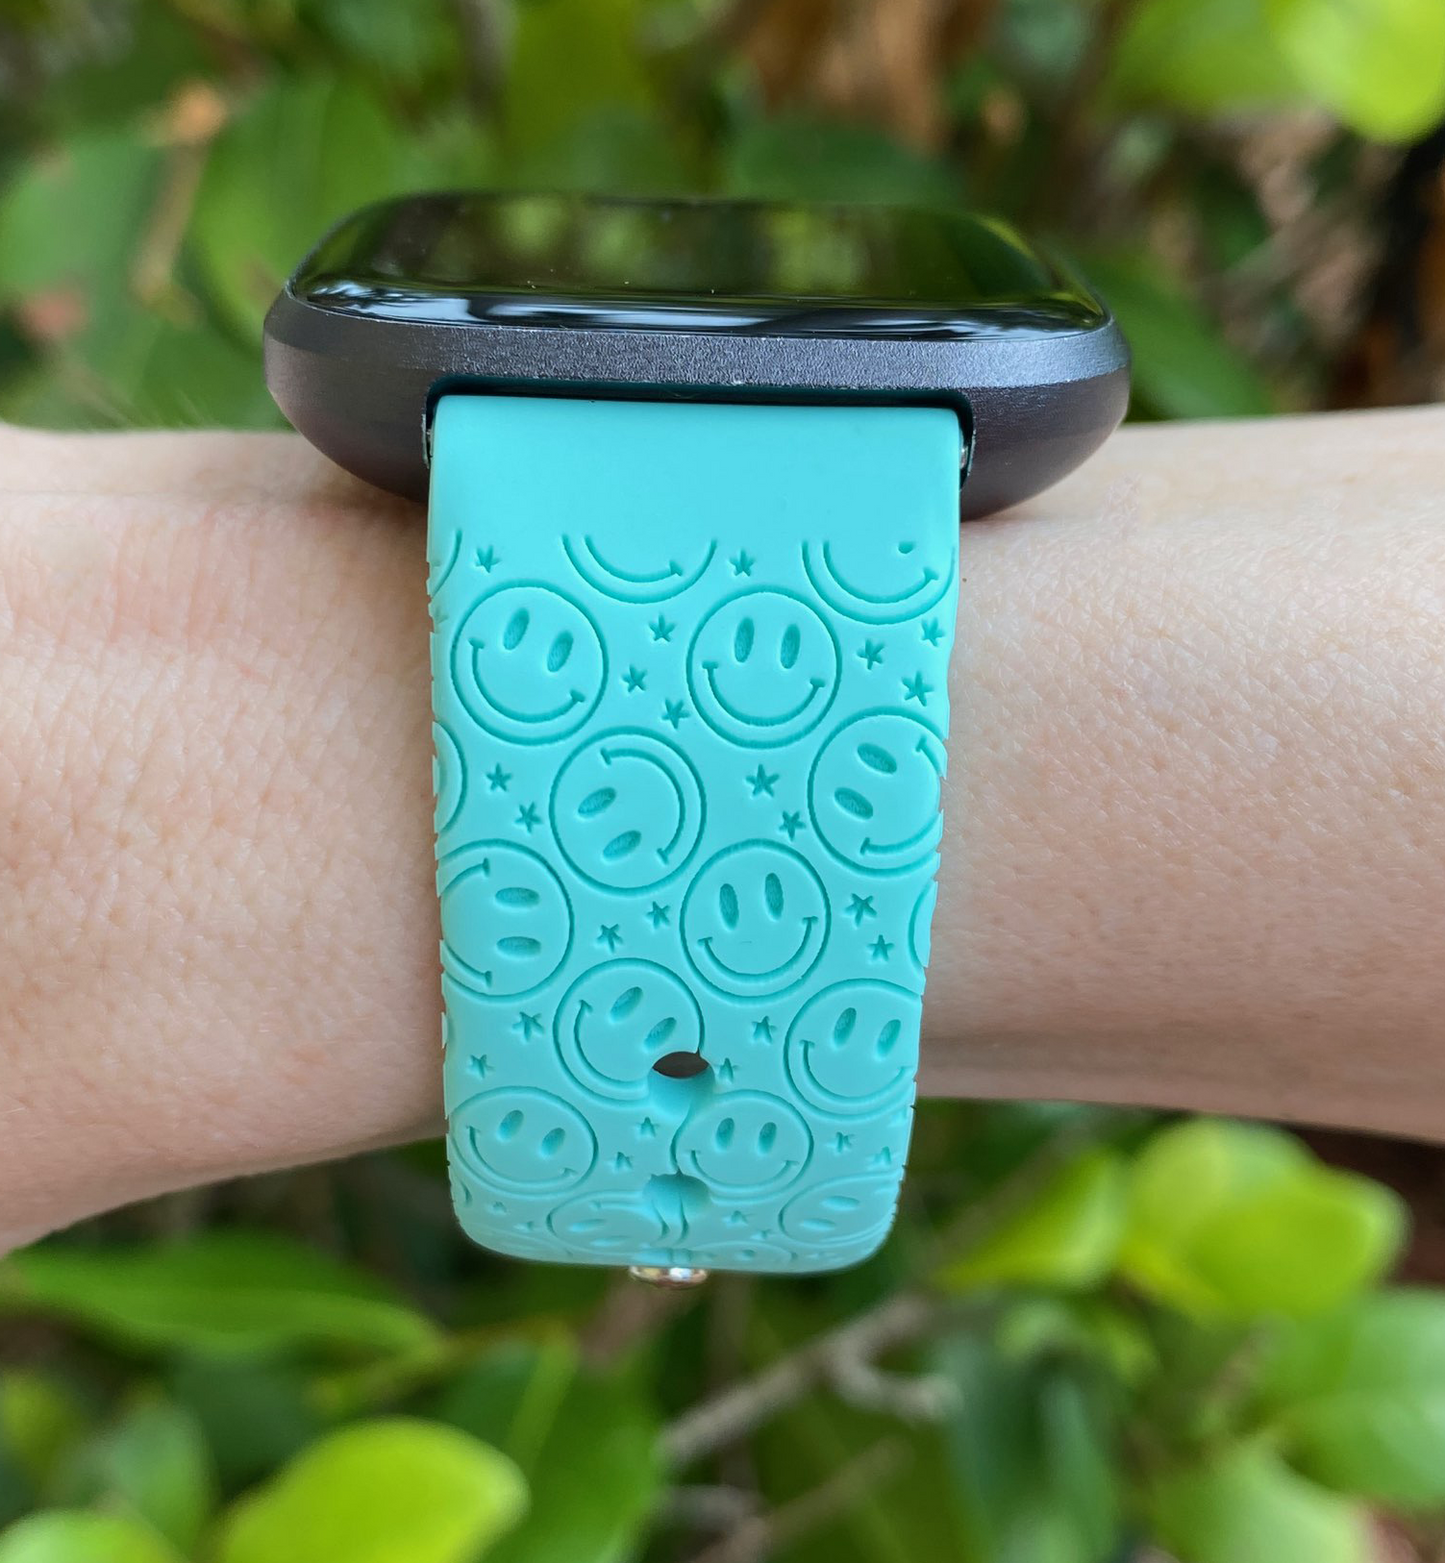 Smiley Fitbit Versa 1/2 Watch Band